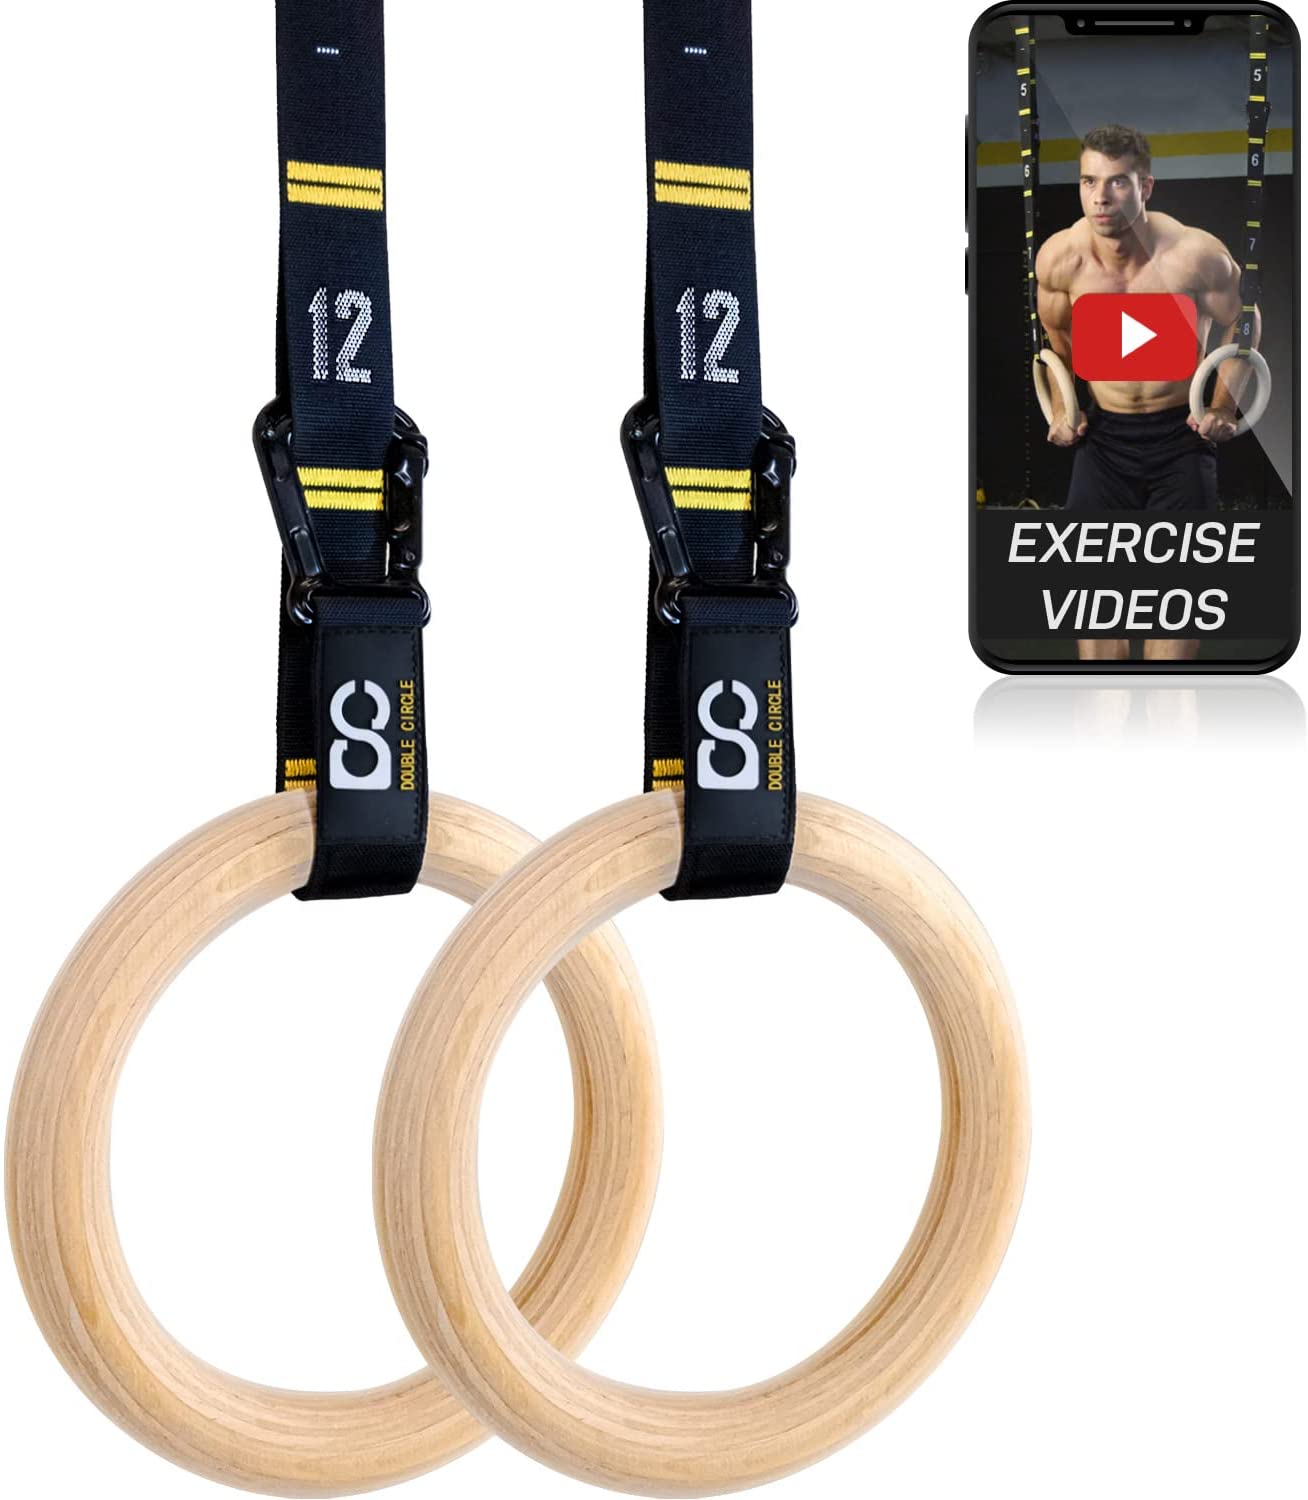 Best Rings For Home Gymnastics- Double Circle Wood Gymnastic Rings